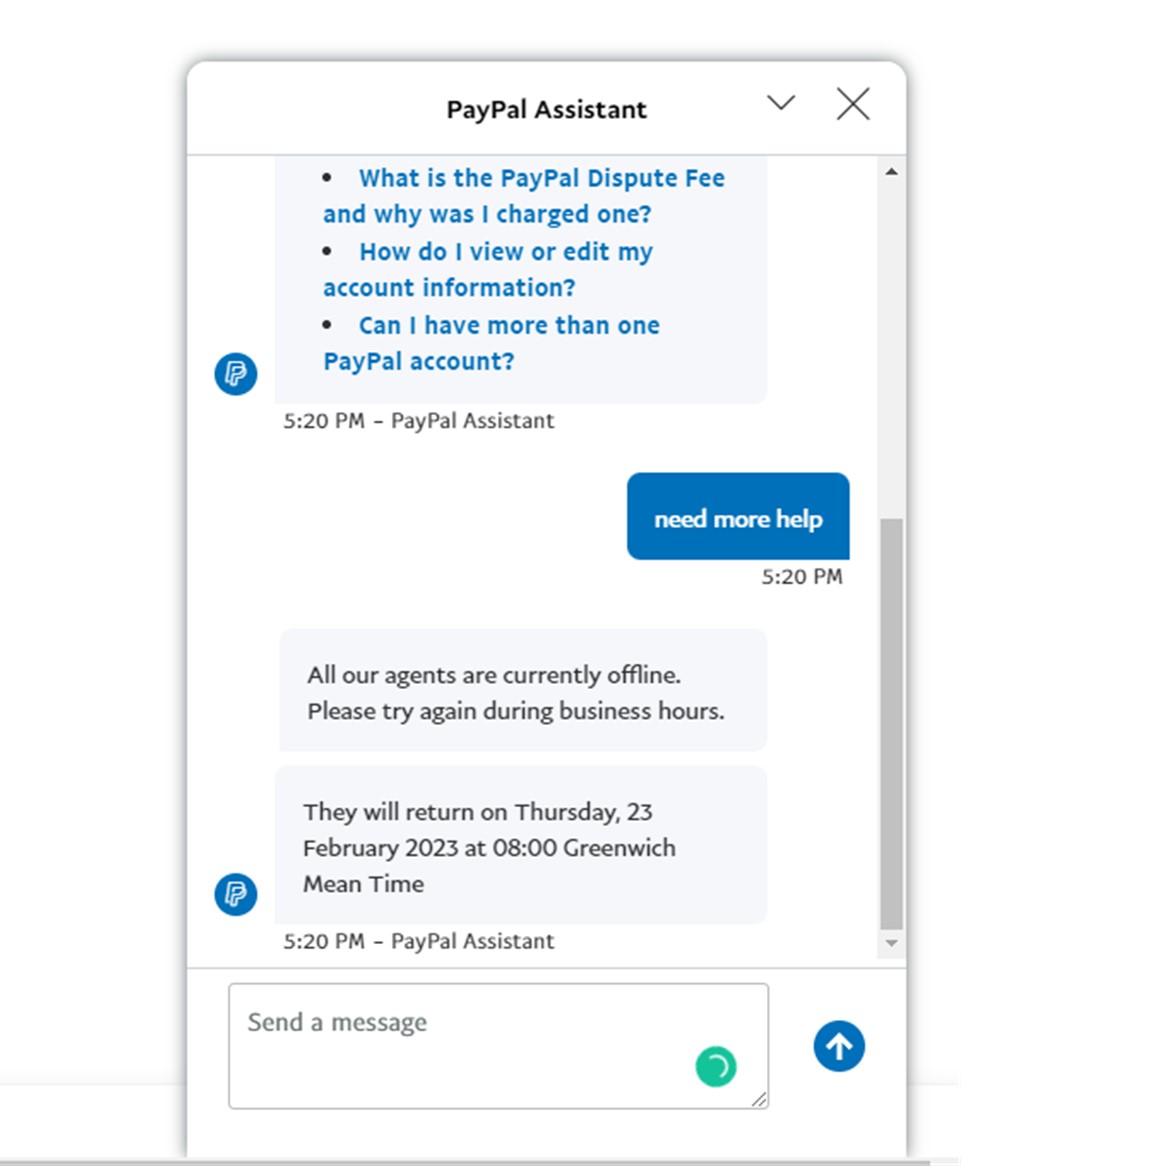 PayPal Assistant Need More Help